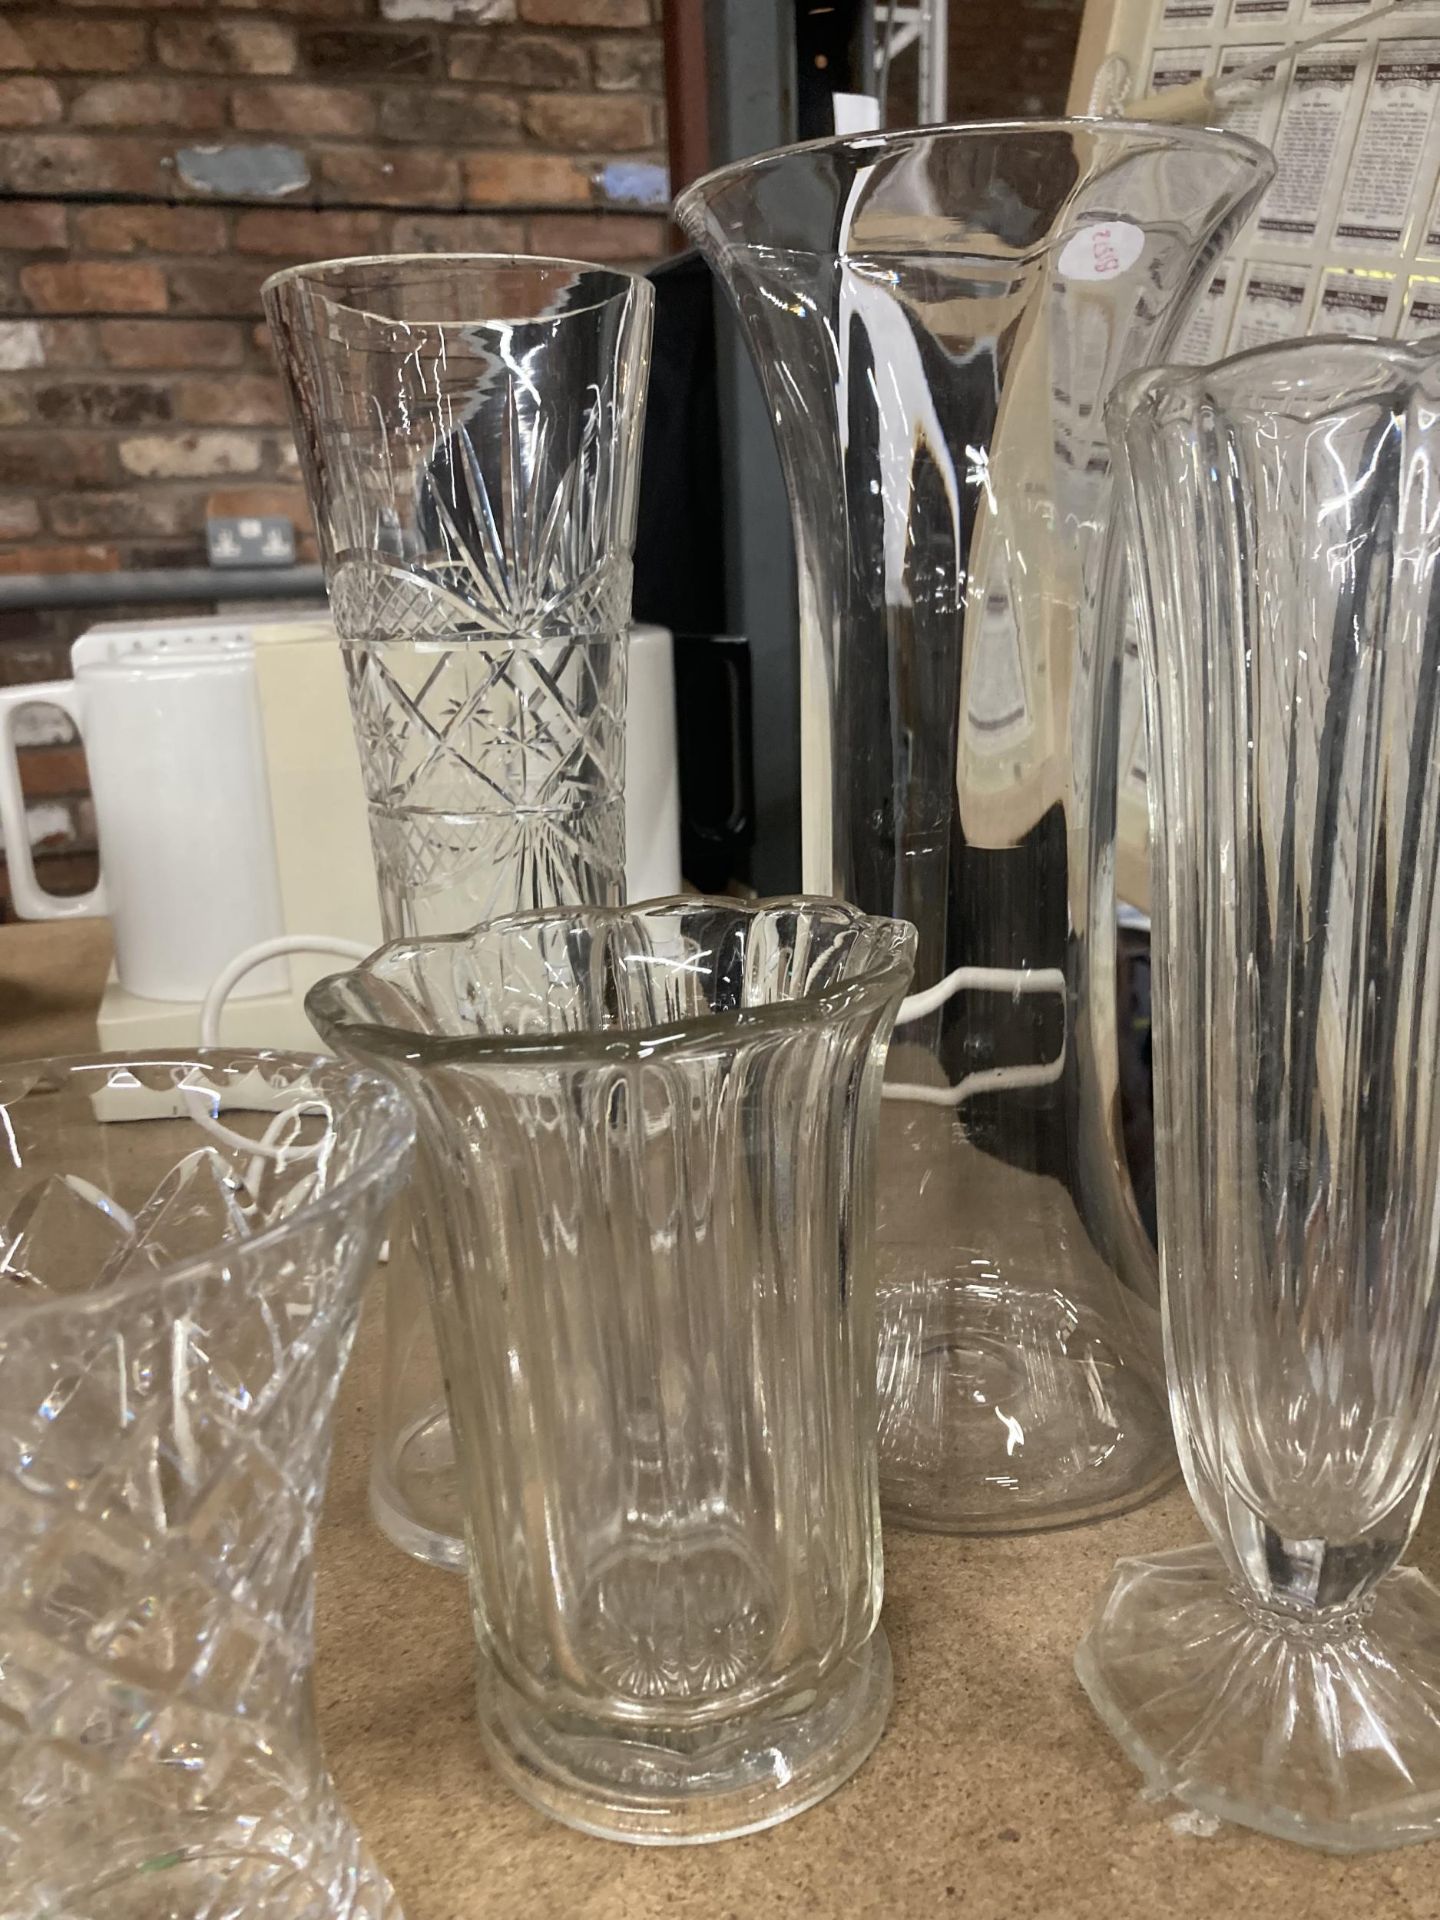 SIX GLASS VASES OF VARYING SIZES - Image 3 of 4